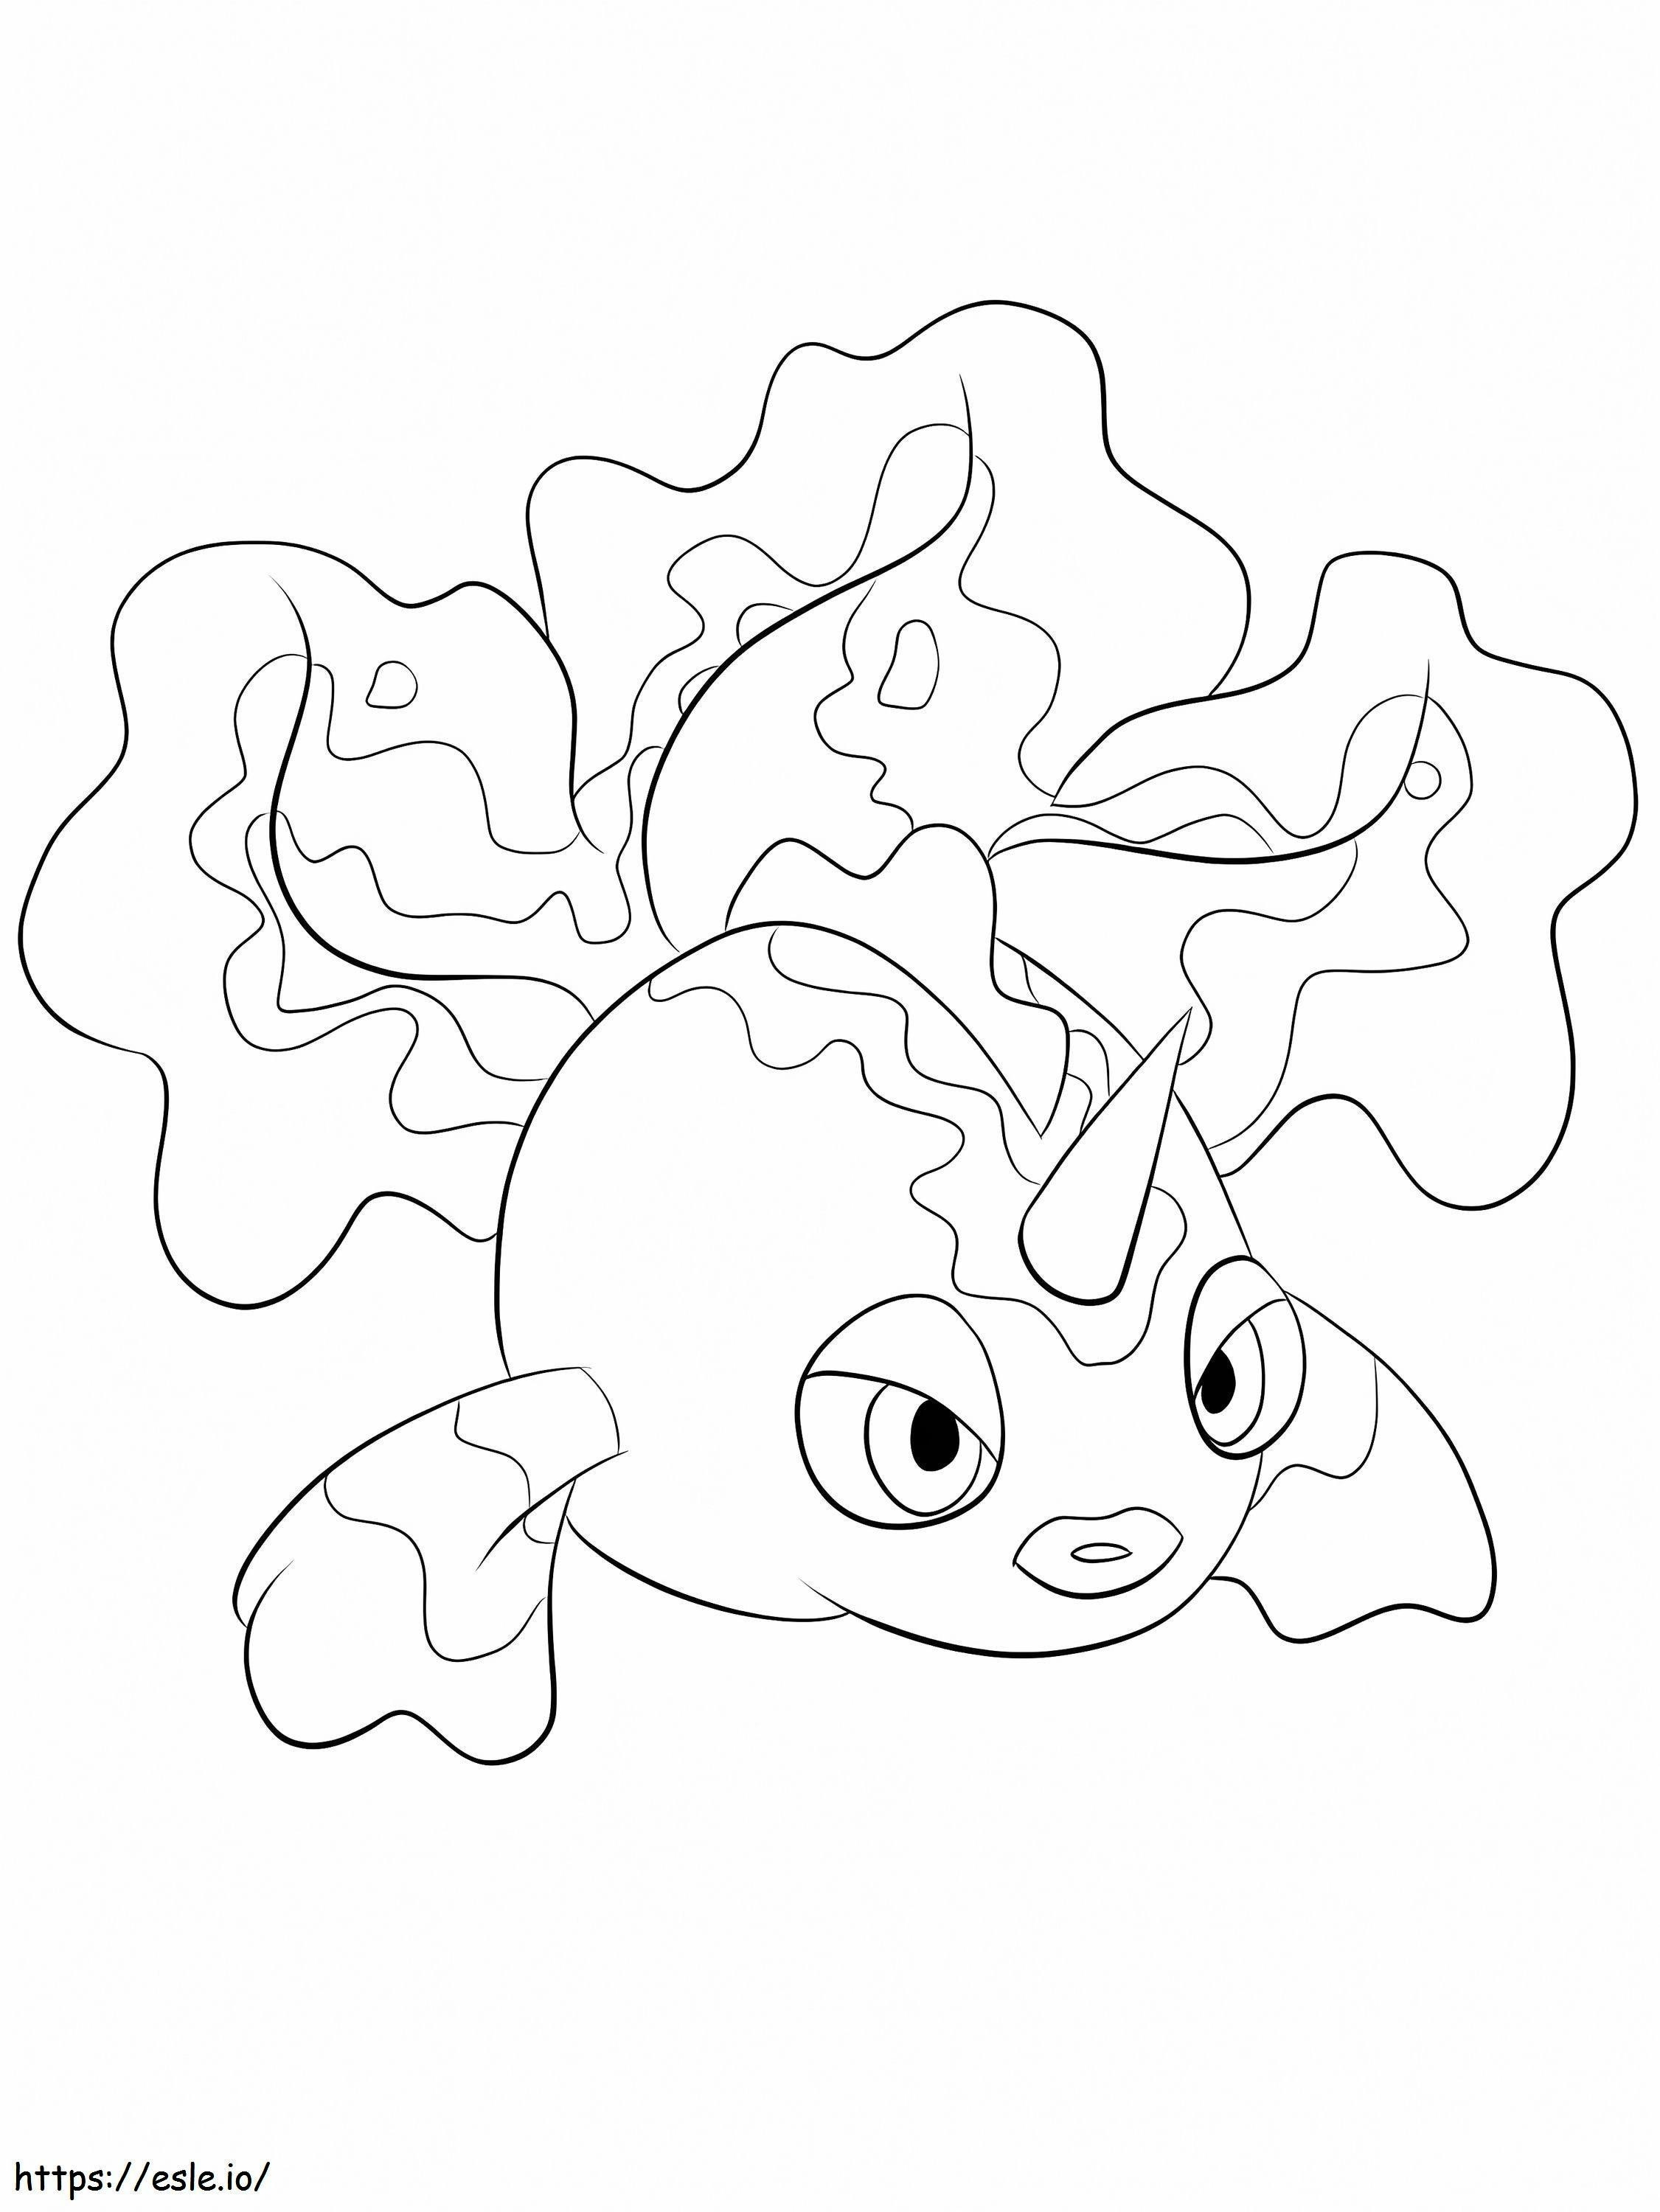 Goldeen Pokemon coloring page